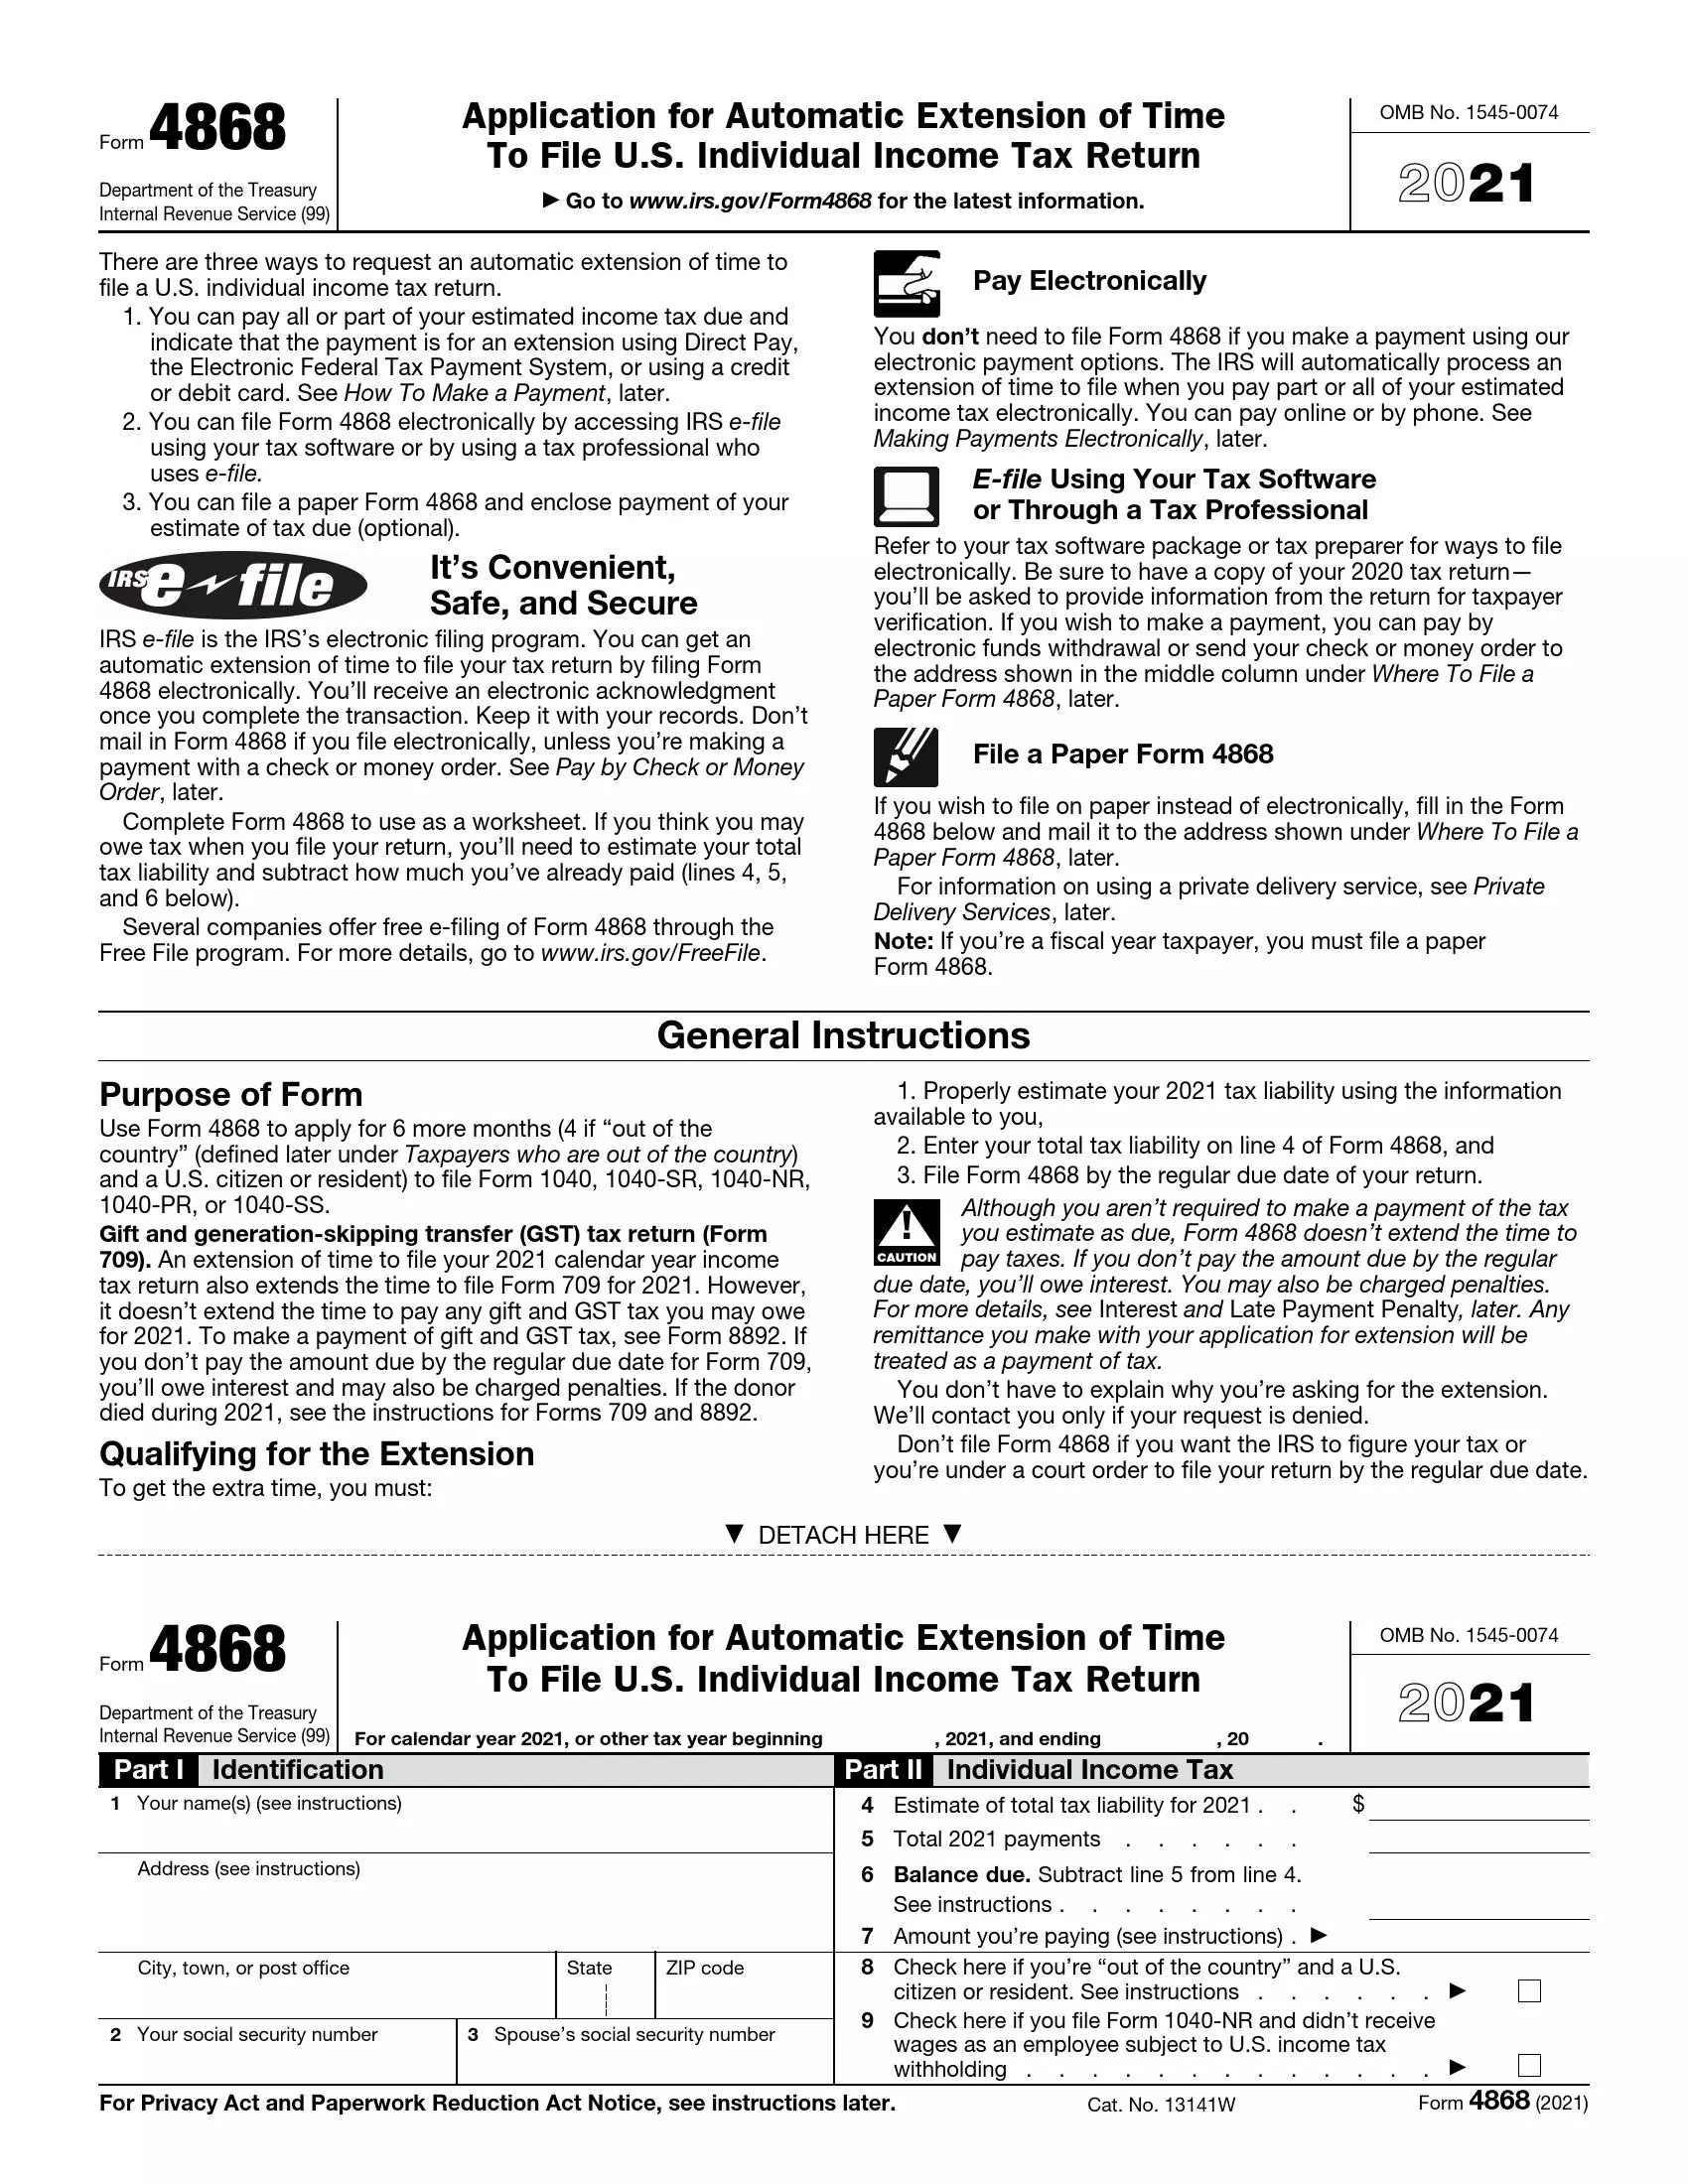 irs form 4868 2021 preview